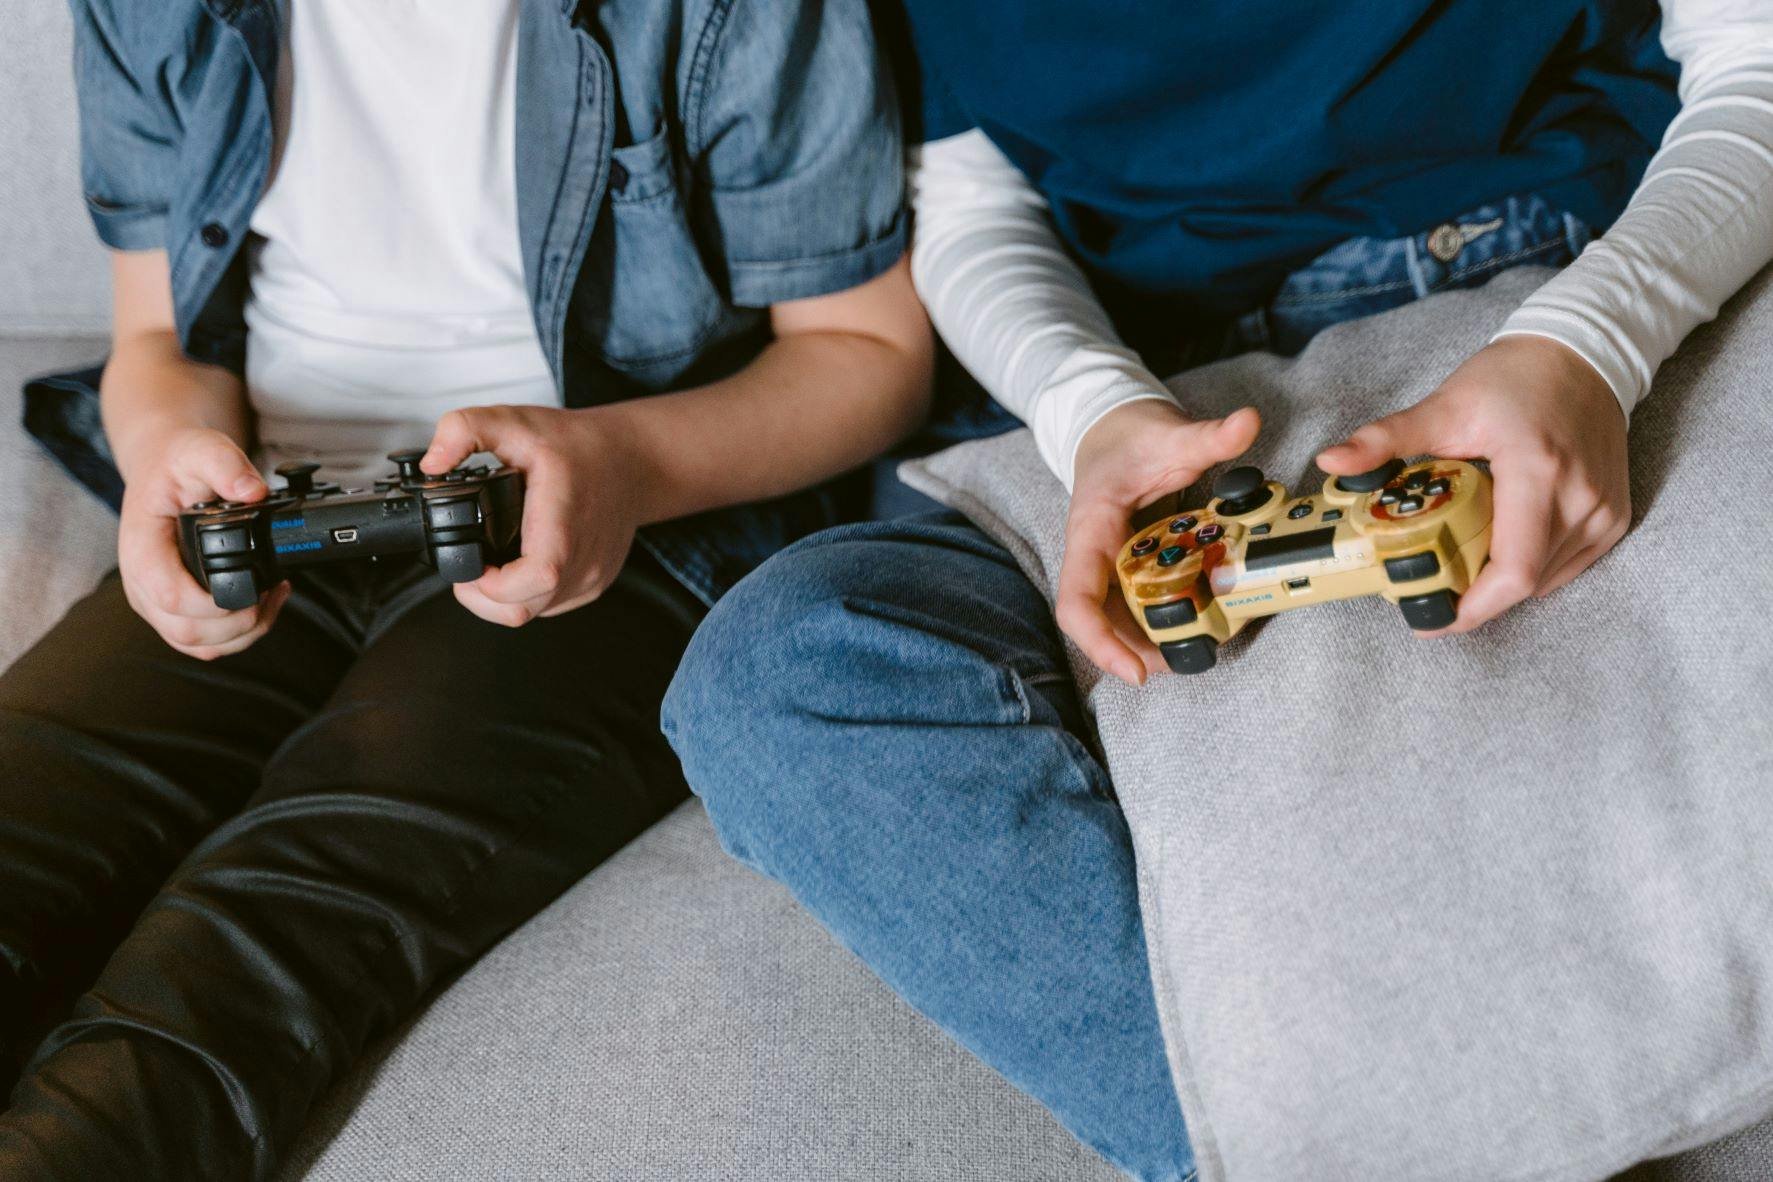 Photo of two boys playing games on a couch. Their faces are cropped out. They represent the influence of video games in transmedia storytelling, transmedia companies, and transmedia franchises